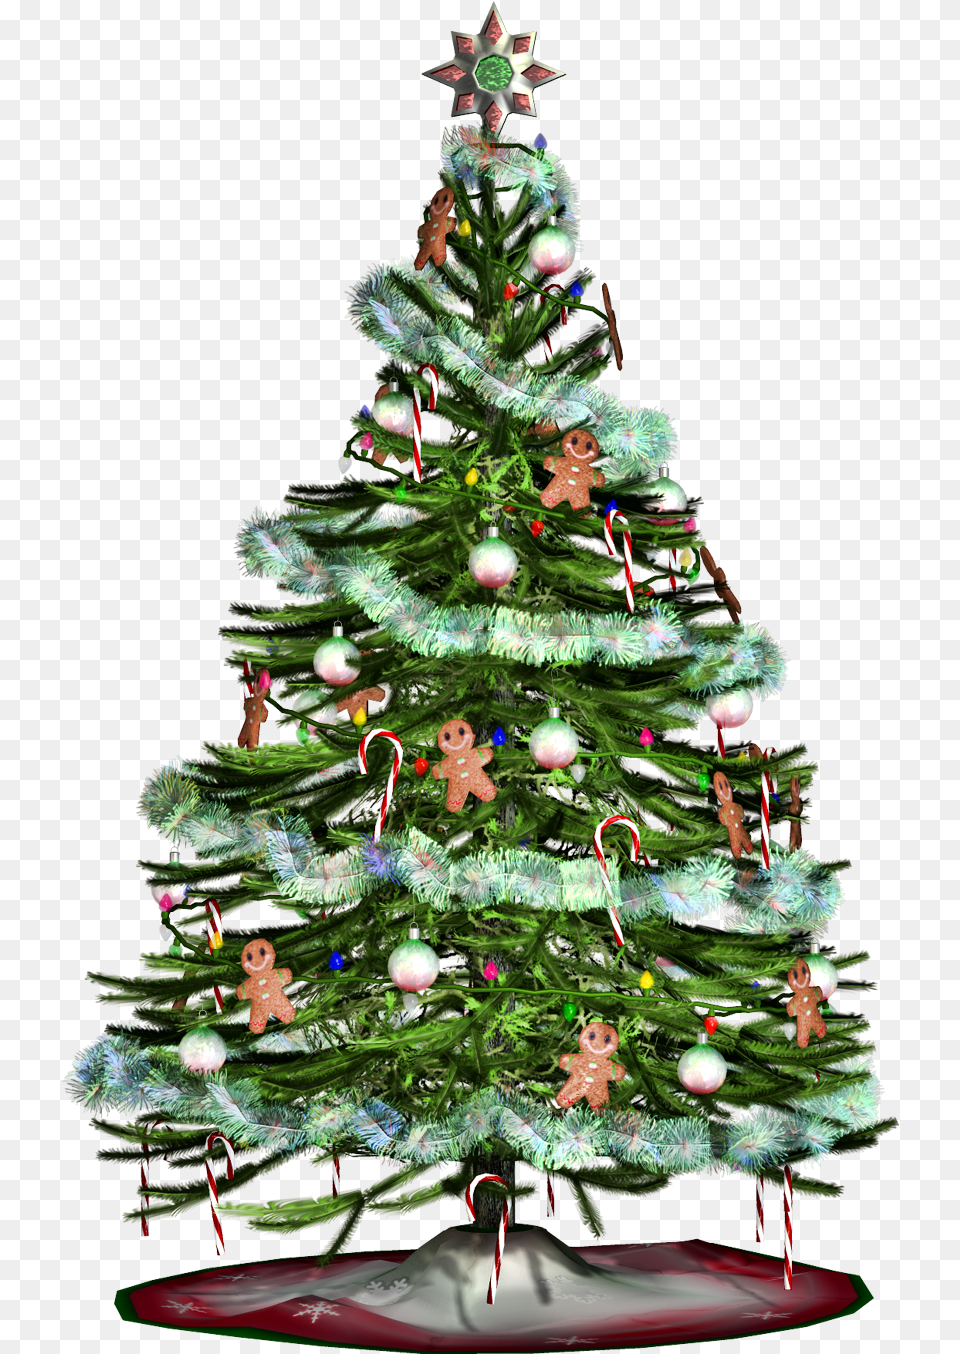 Christmas Tree Decorated Image Transparent No Christmas In Islam, Plant, Christmas Decorations, Festival, Christmas Tree Free Png